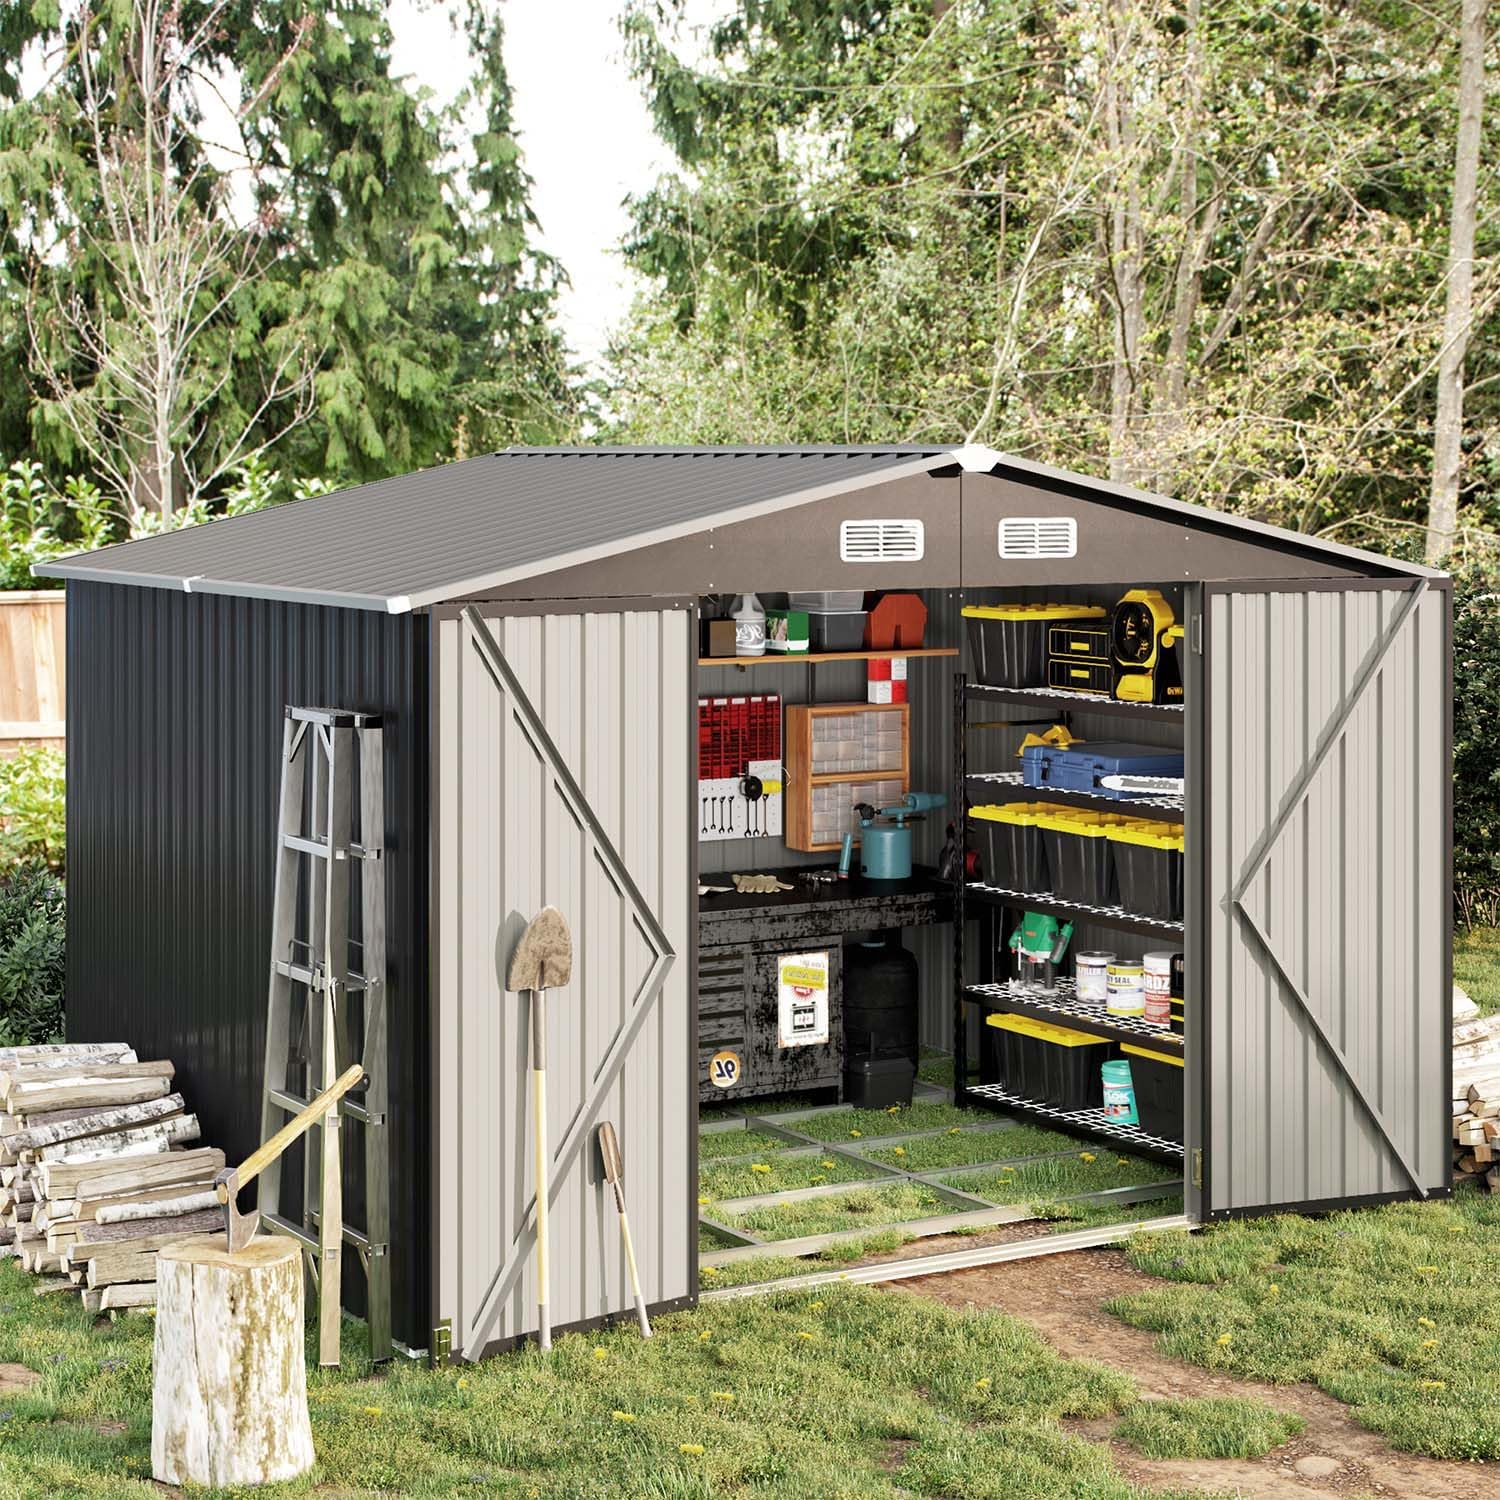 9.6' x 7.8' Metal Utility Tool Shed, Steel Storage Shed with Air Vent & Lockable Doors, Black